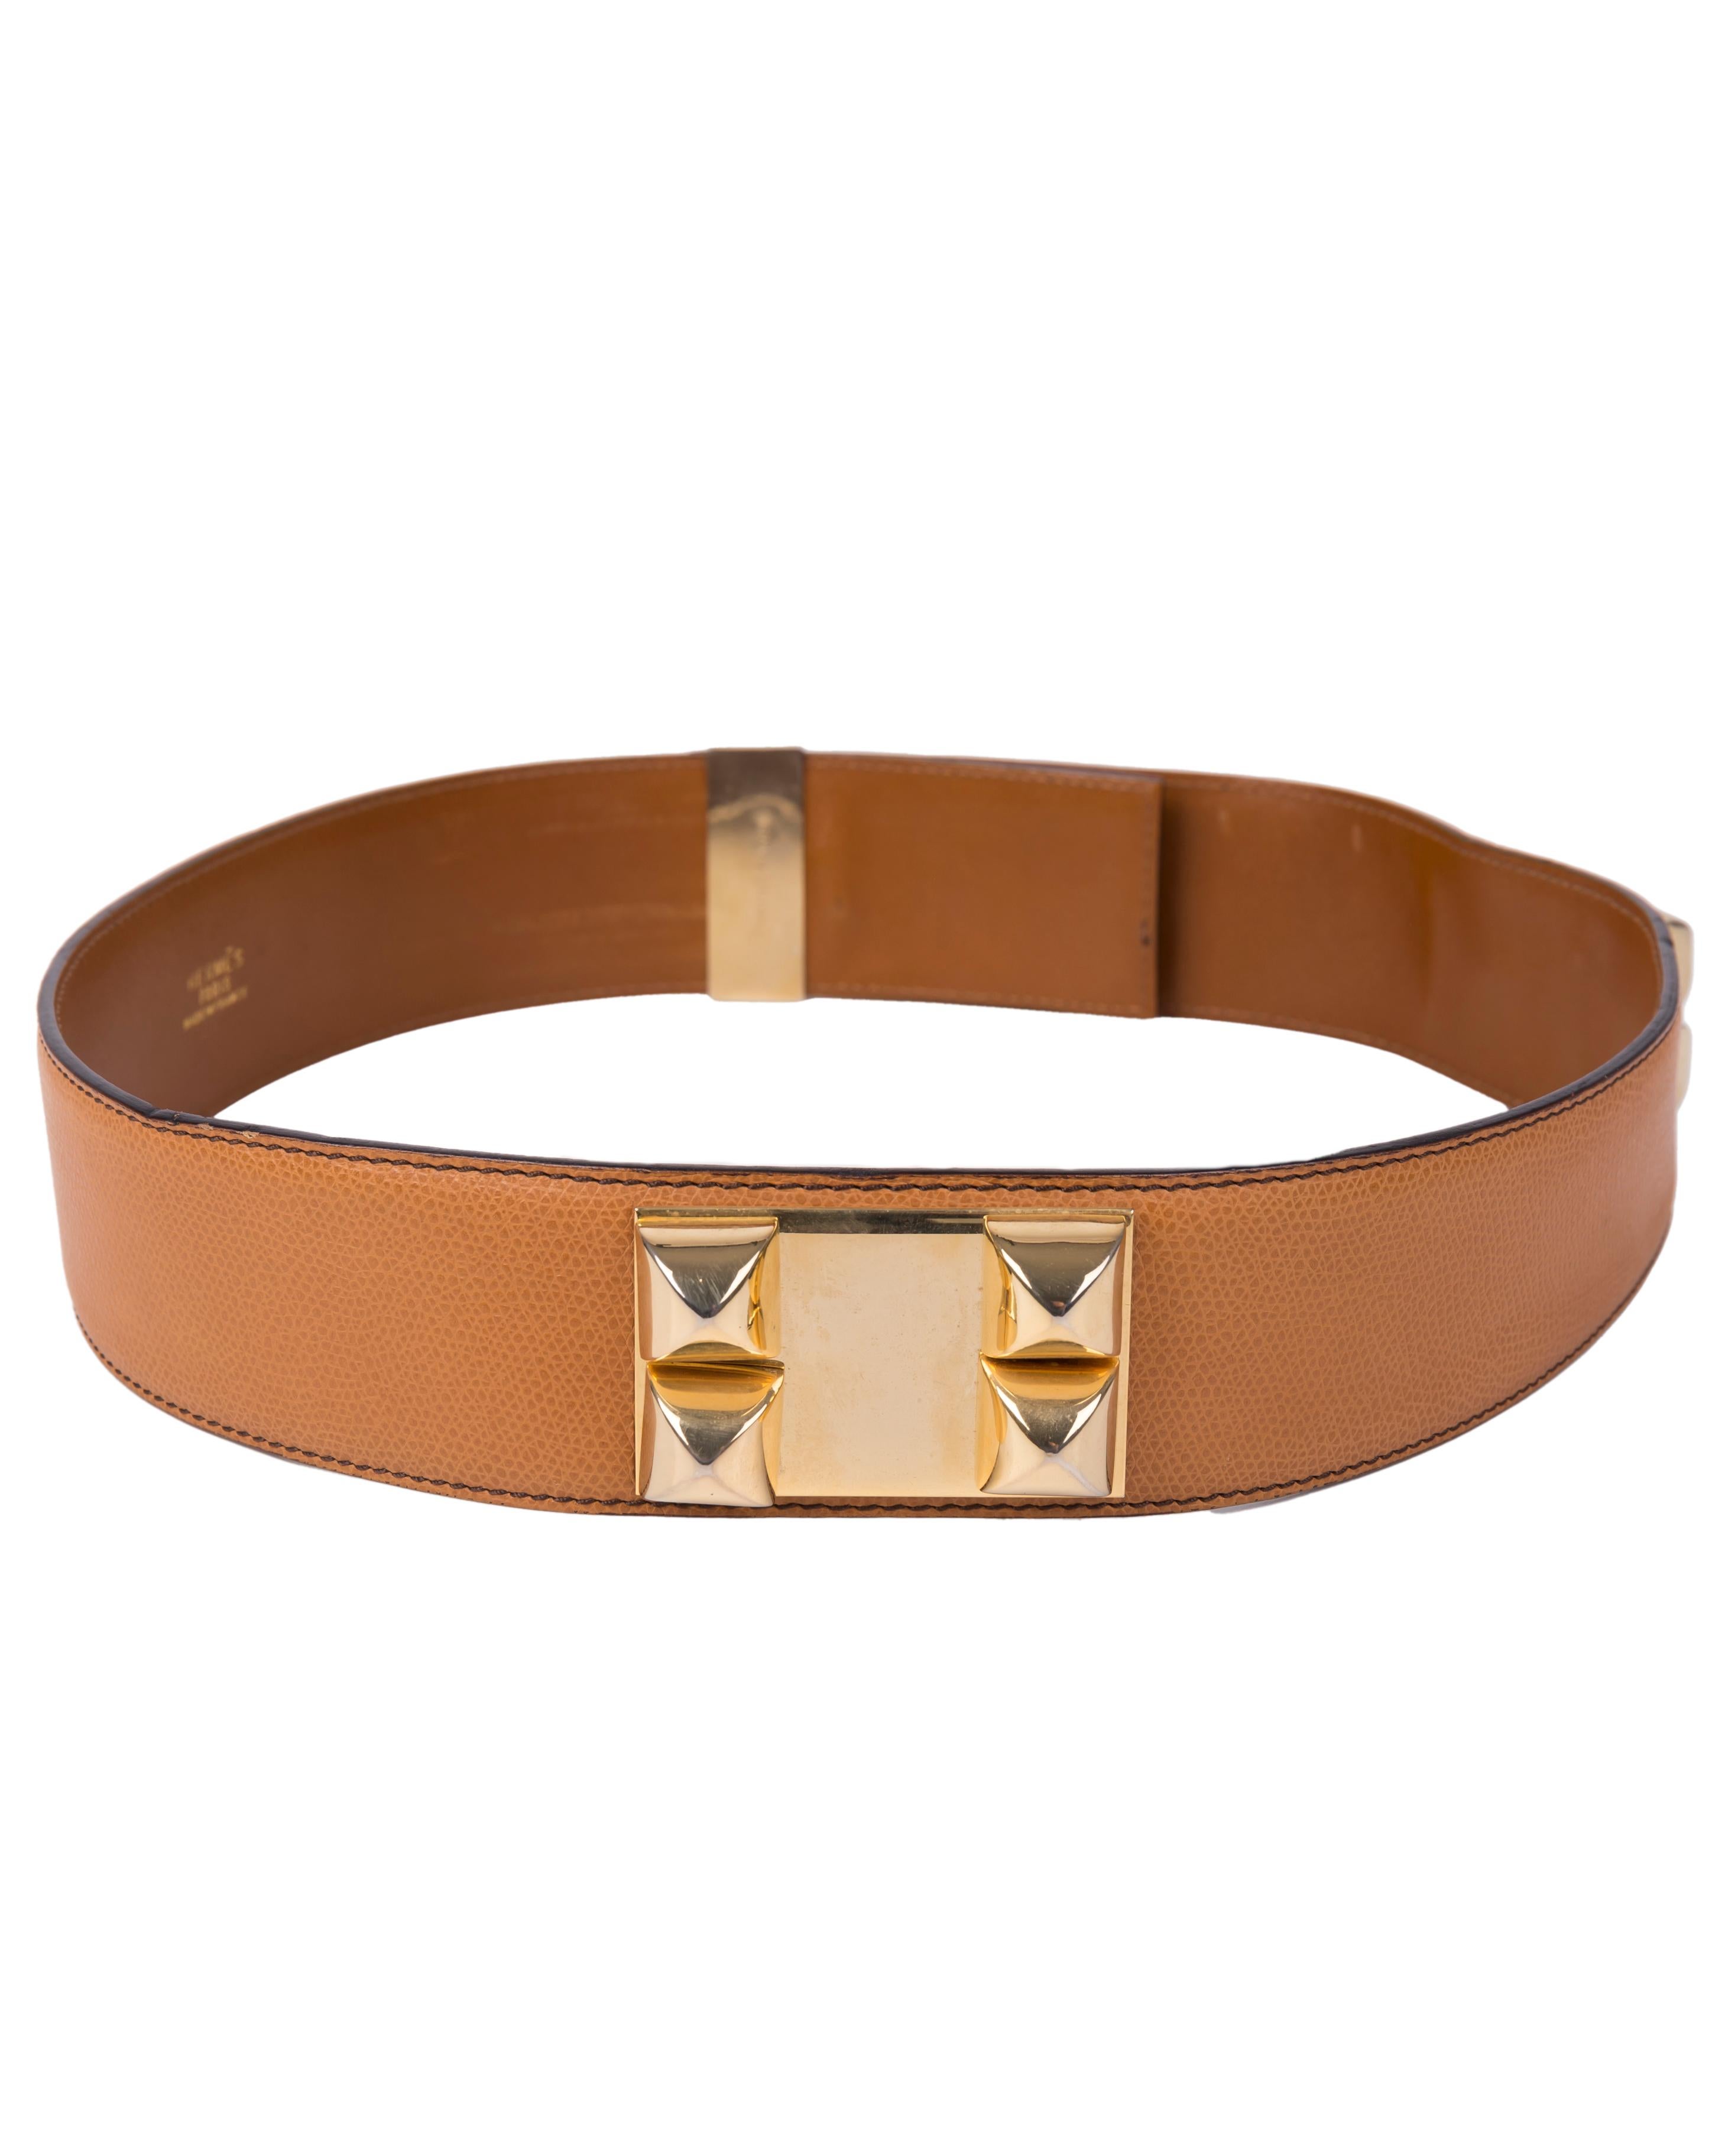 - Tan leather belt
- Gold plated hardware
- Brown stitching